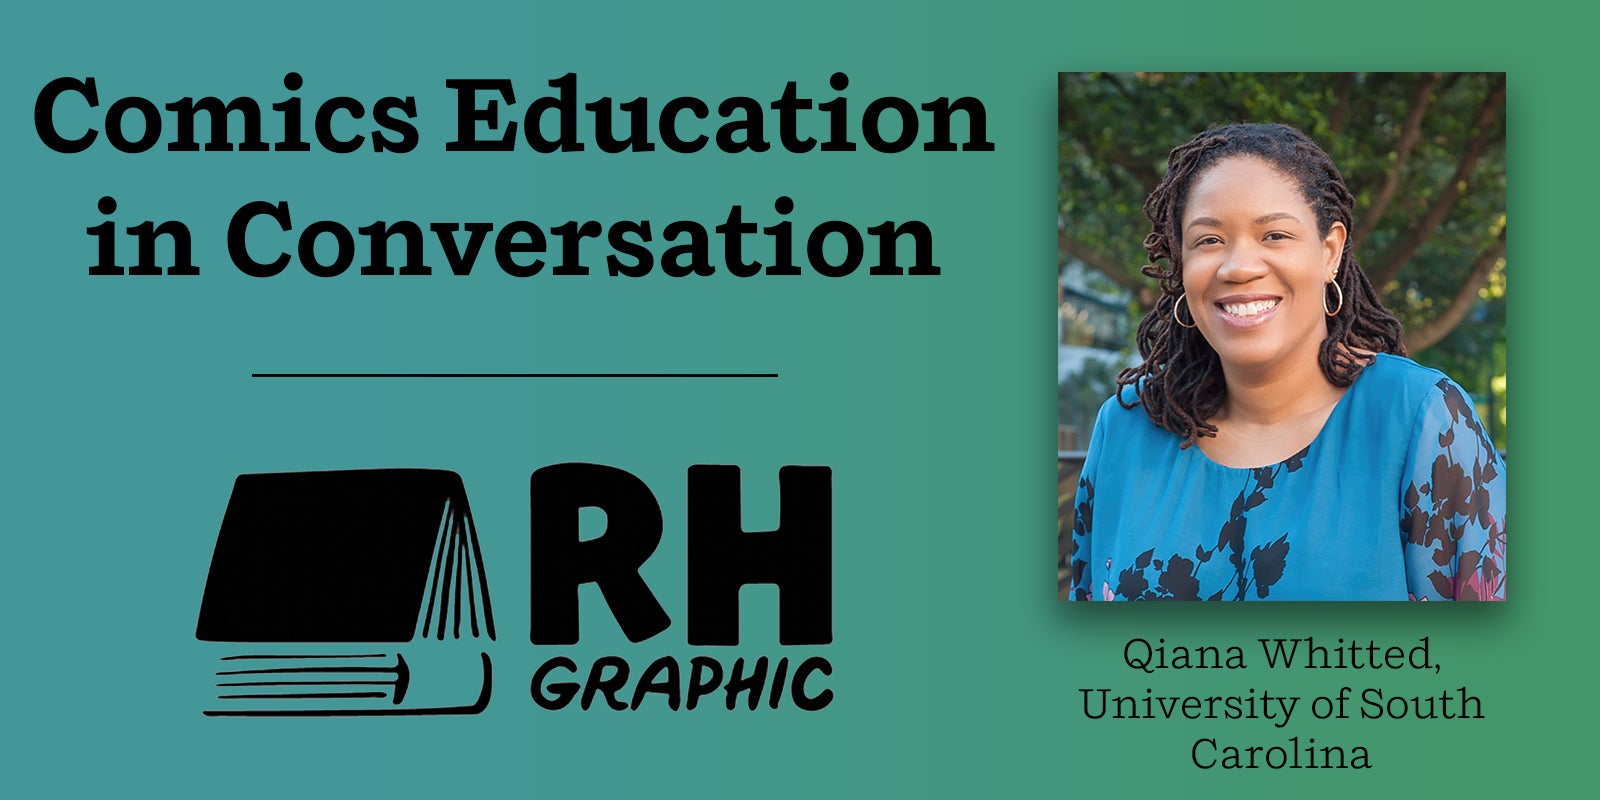 Comics Education in Conversation: Qiana Whitted